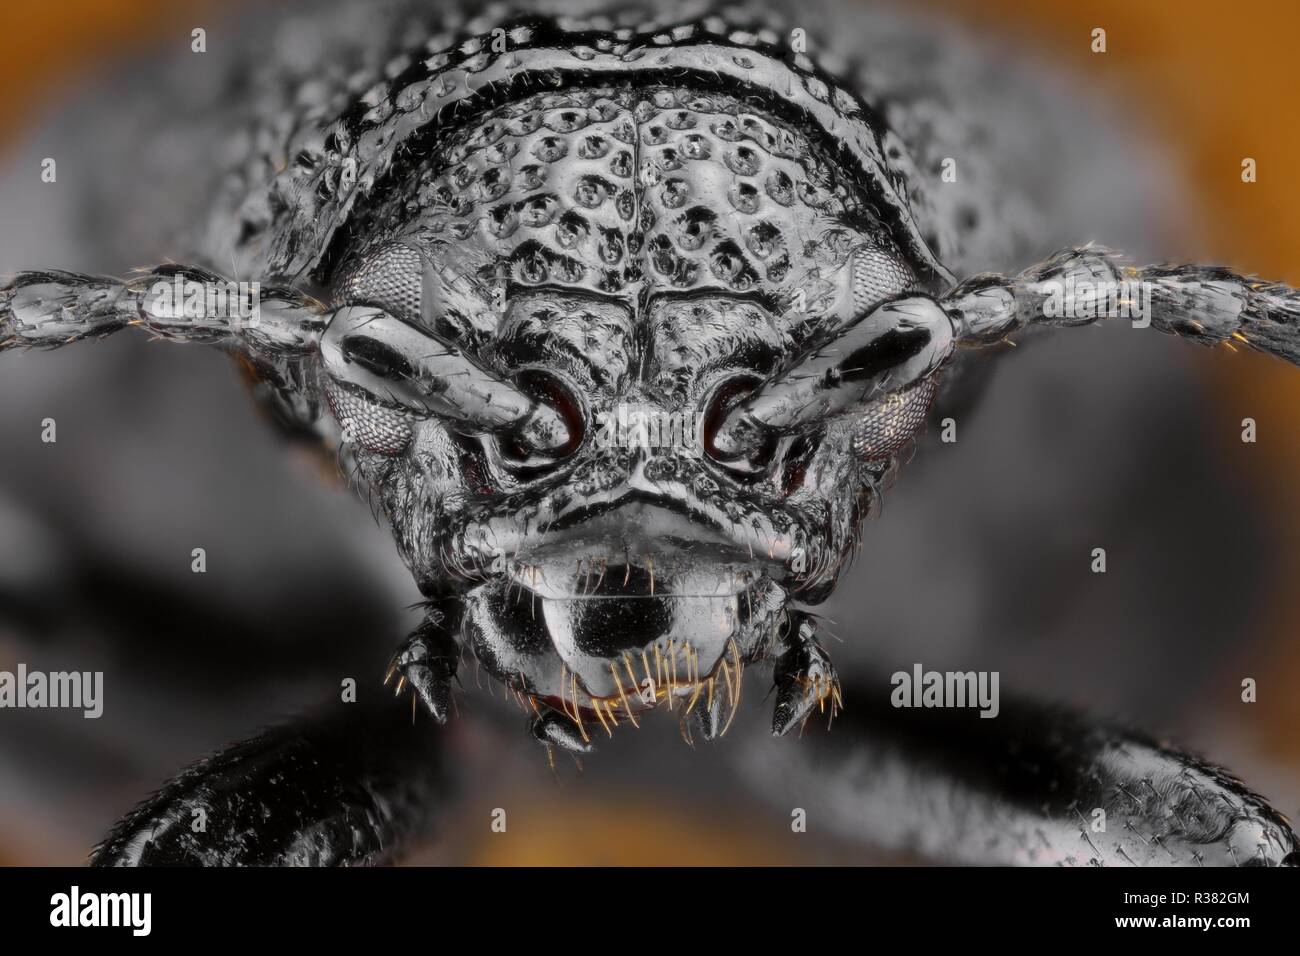 Extremely sharp and detailed study of an insect head taken with a macro lens stacked from many images into one very sharp photo. Stock Photo